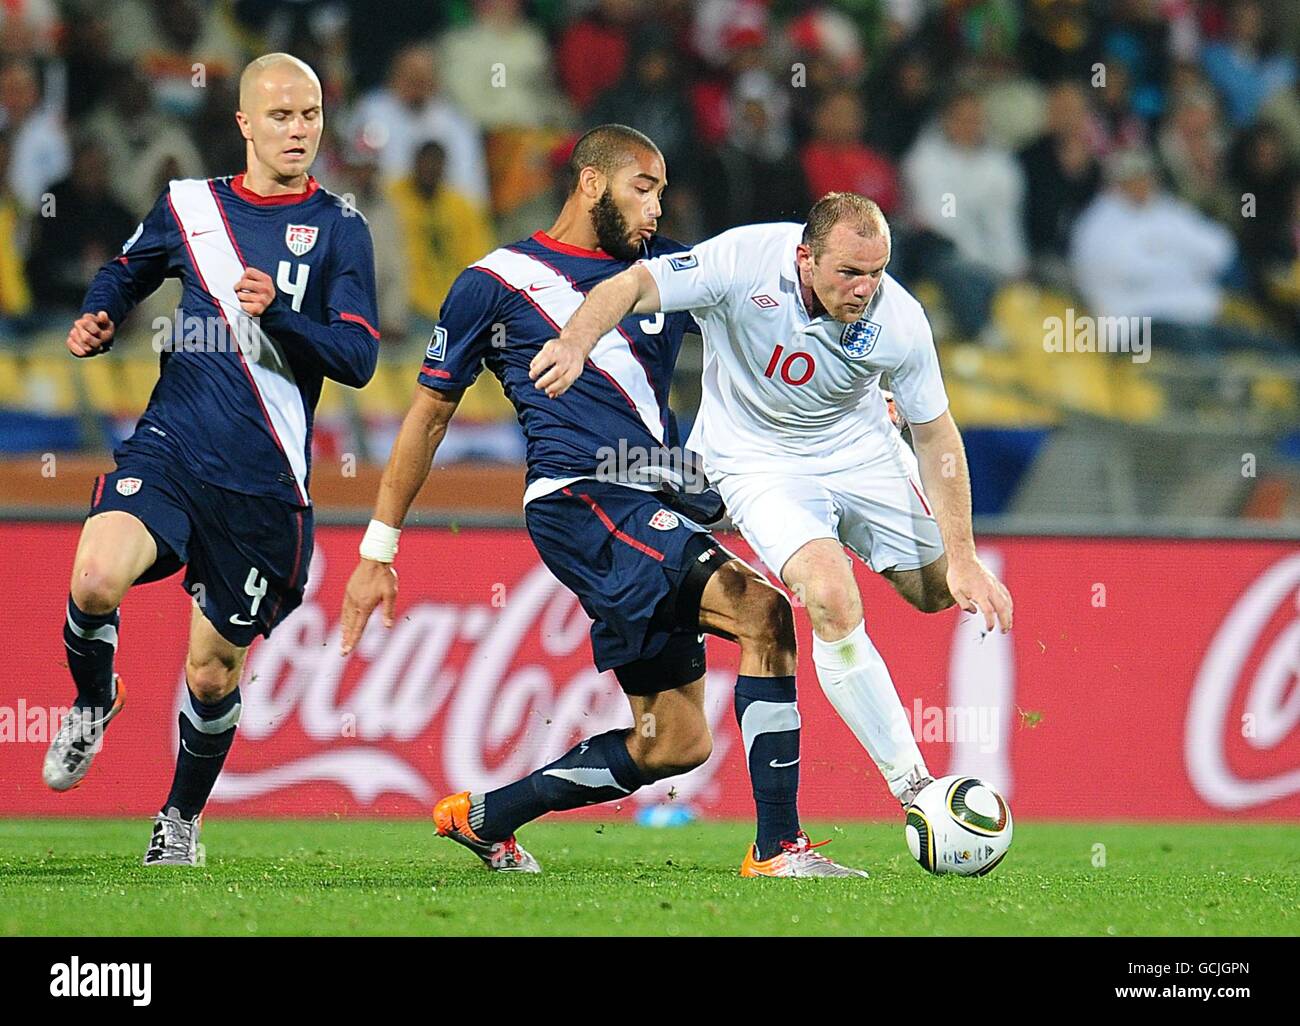 Soccer - 2010 FIFA World Cup South Africa - Group C - England v USA - Royal Bafokeng Stadium. USA's Oguchi Onyewu and England's Wayne Rooney (right) battle for the ball Stock Photo